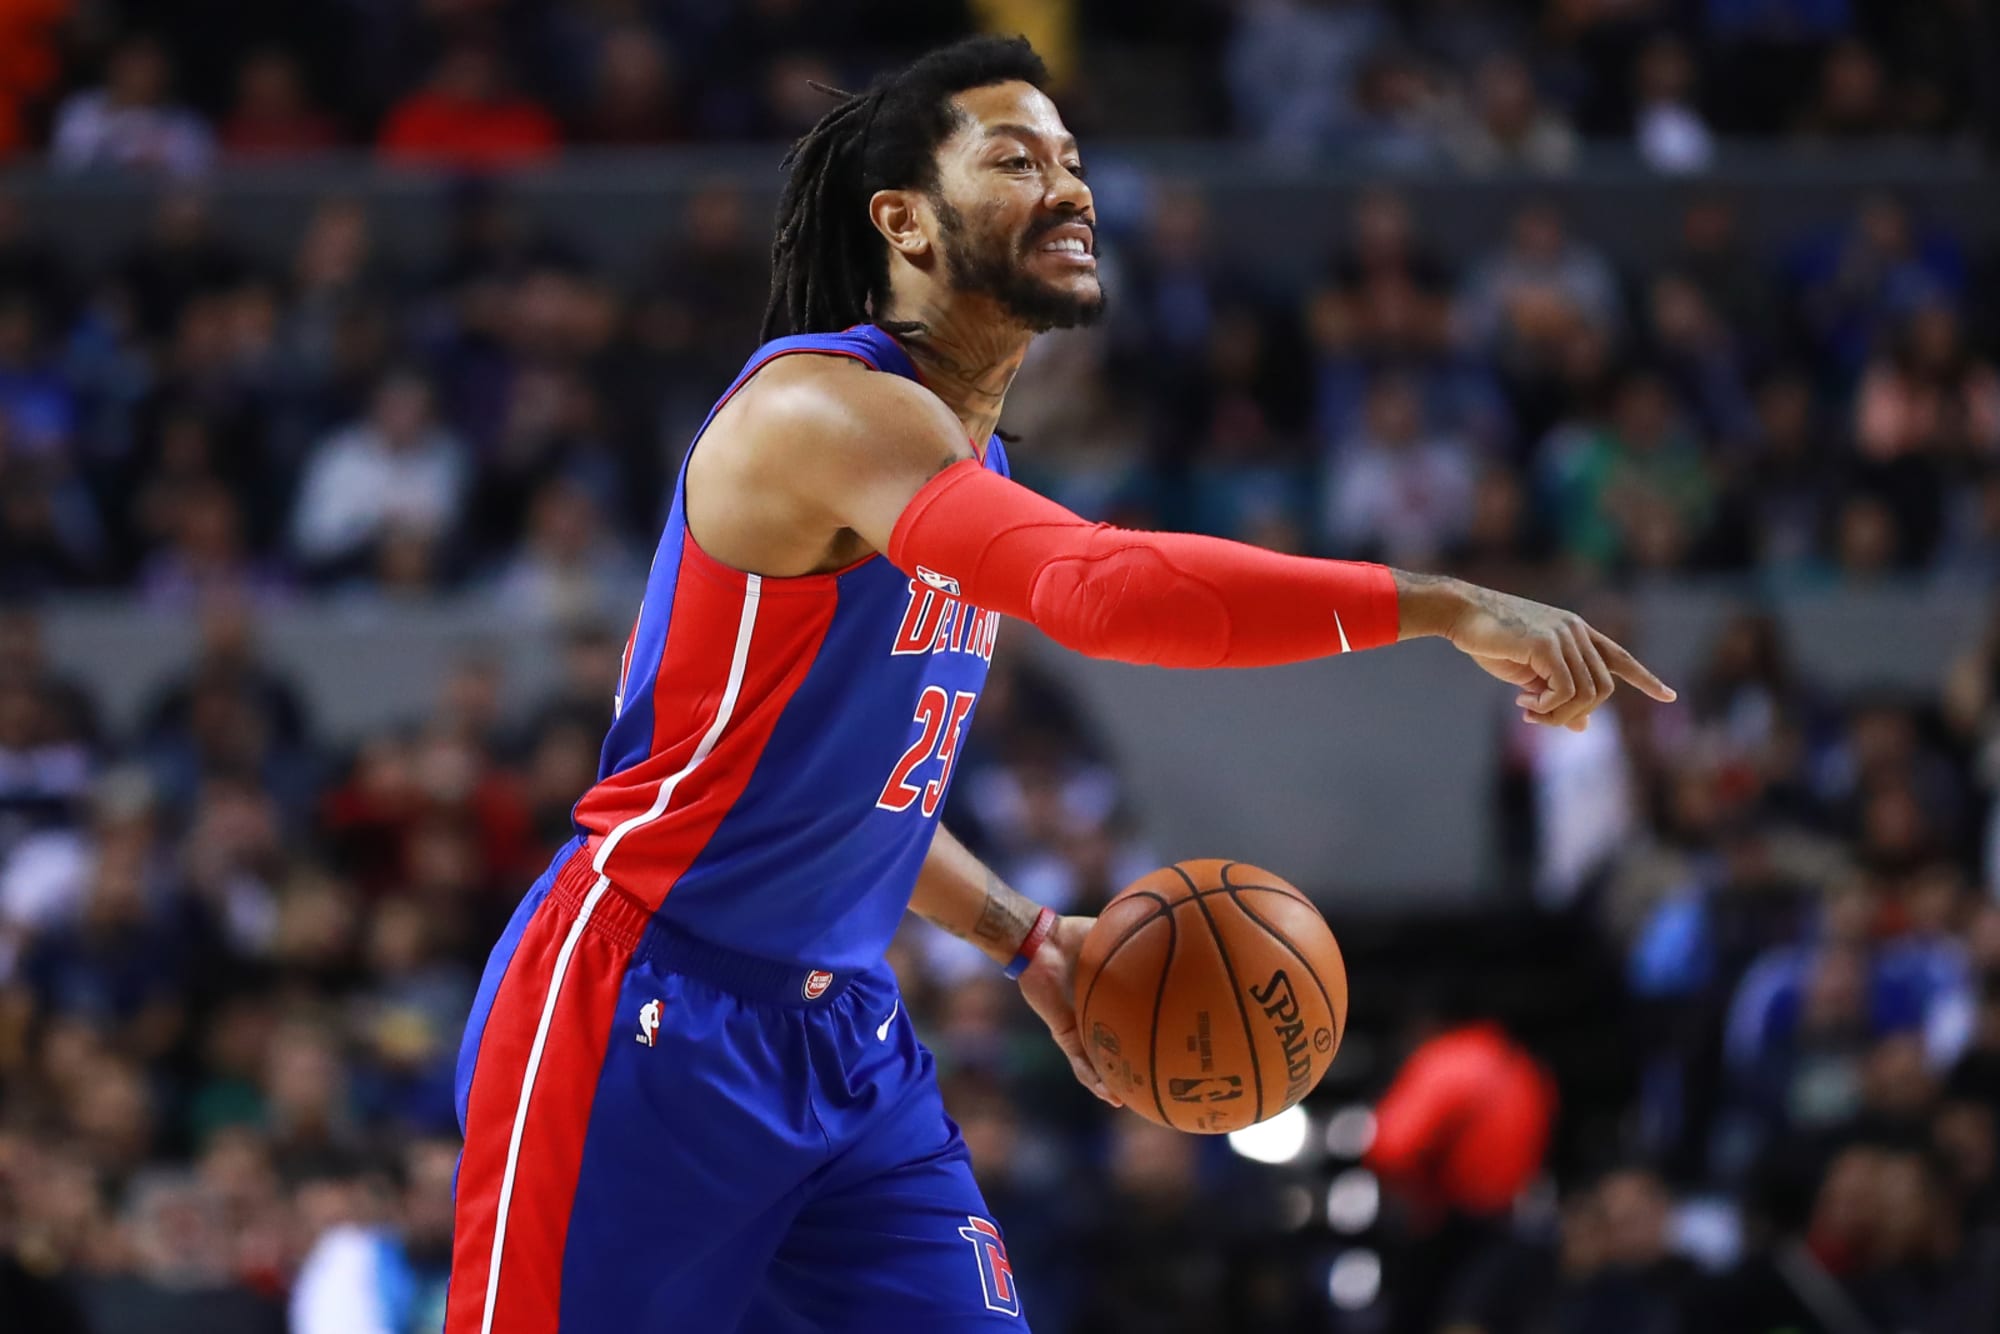 Detroit Pistons' Derrick Rose 'OK to go' after injury scare